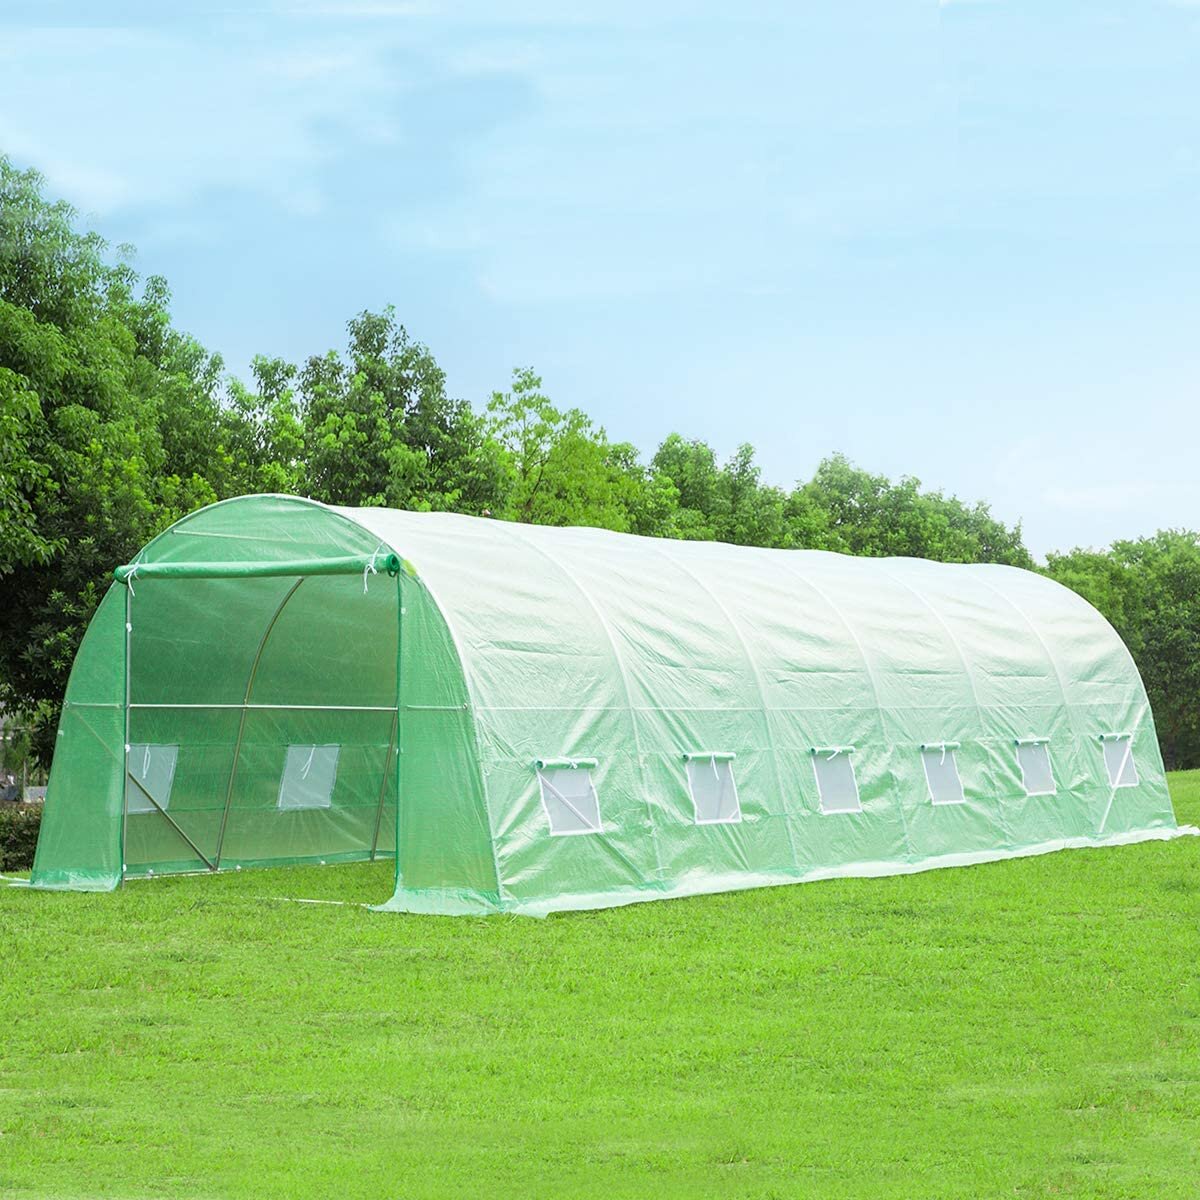 EROMMY 15'×6.6'×6.6' Greenhouse Upgraded Large Walk-in Greenhouse Portable Greenhouse with Reinforced Frame&8 Screen Windows Tunnel Garden Plant Hot Green House for Outside Heavy Duty Winter,White 